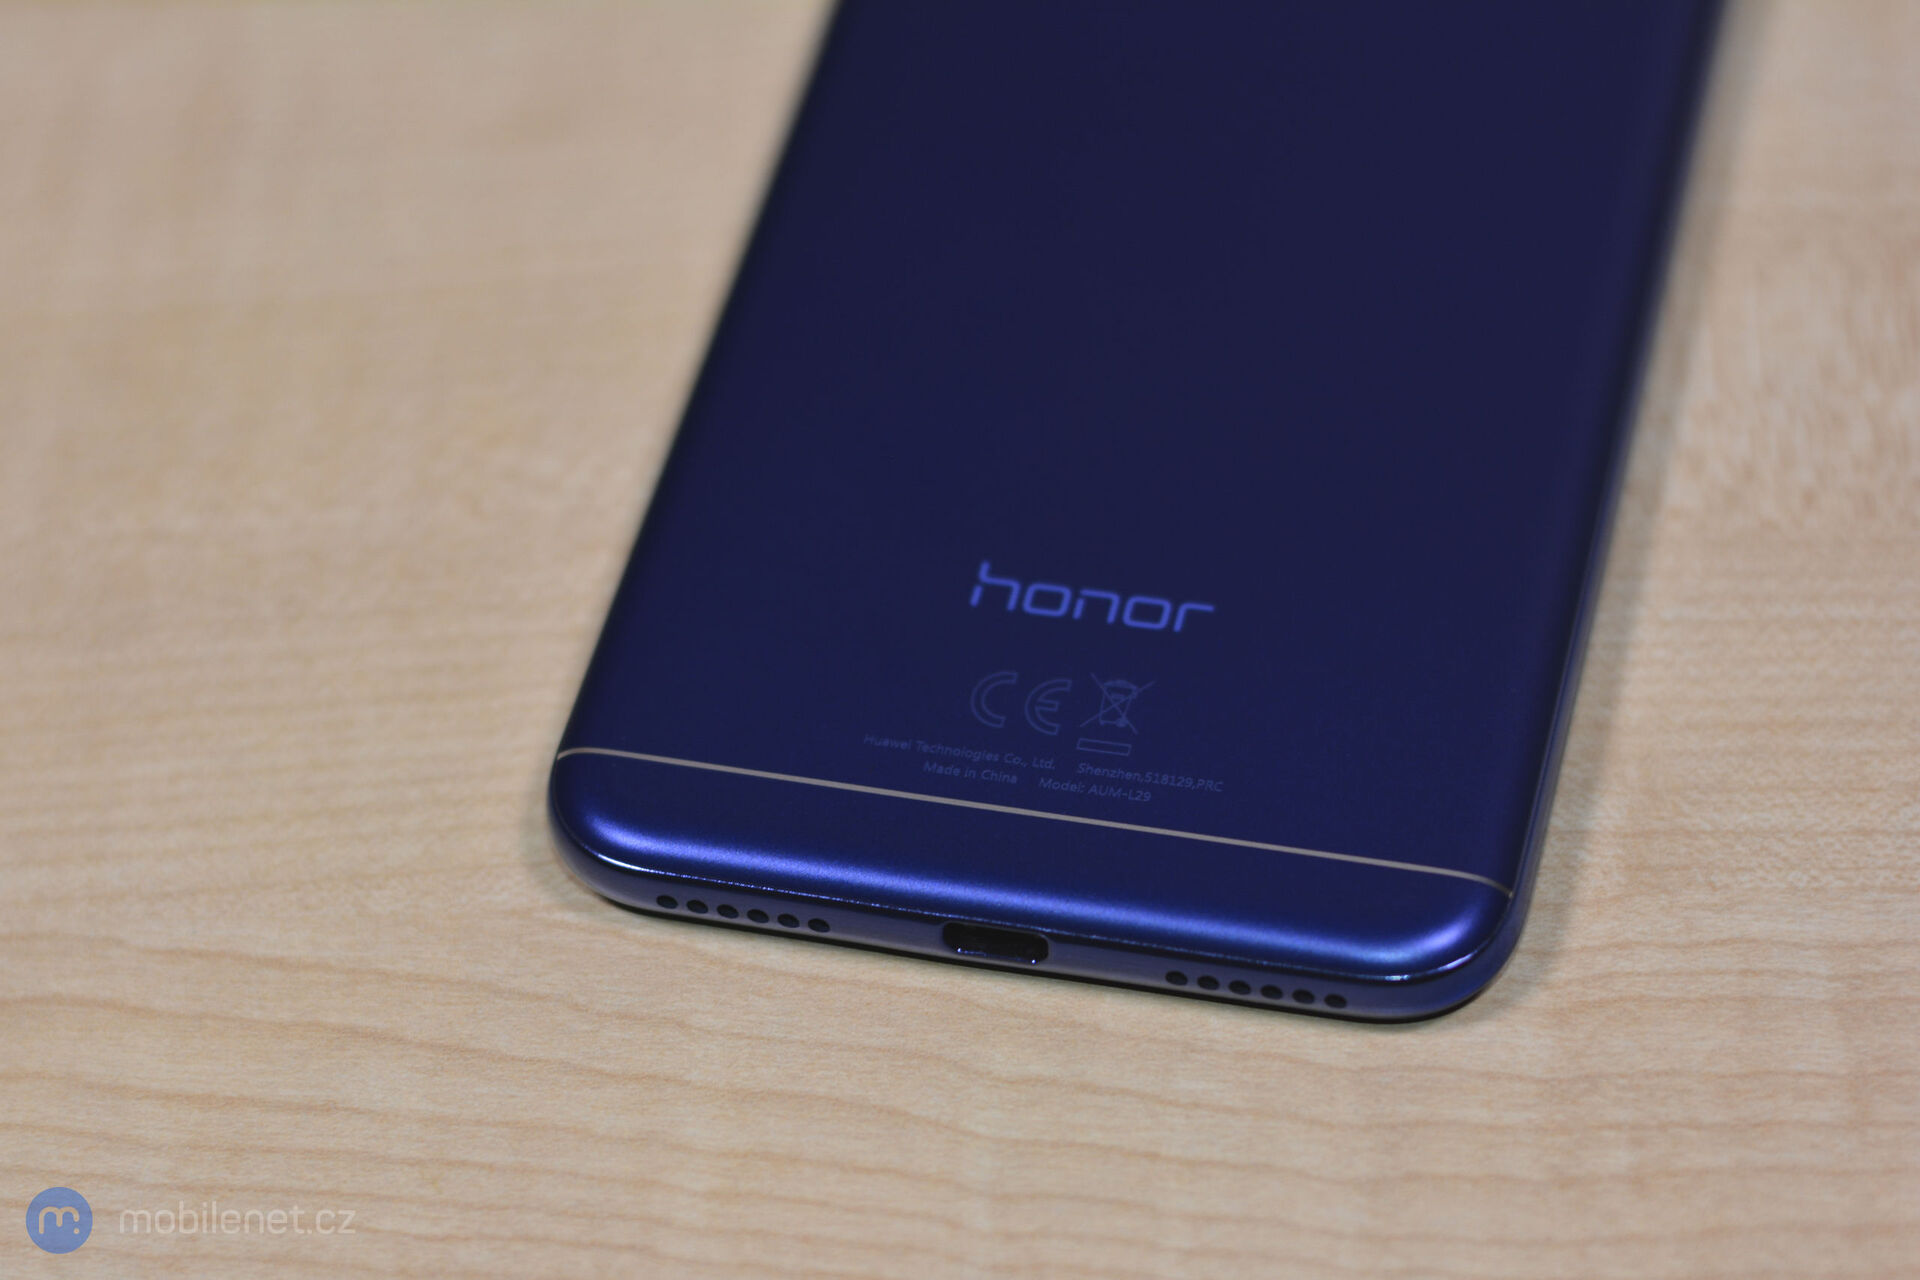 Honor 7A